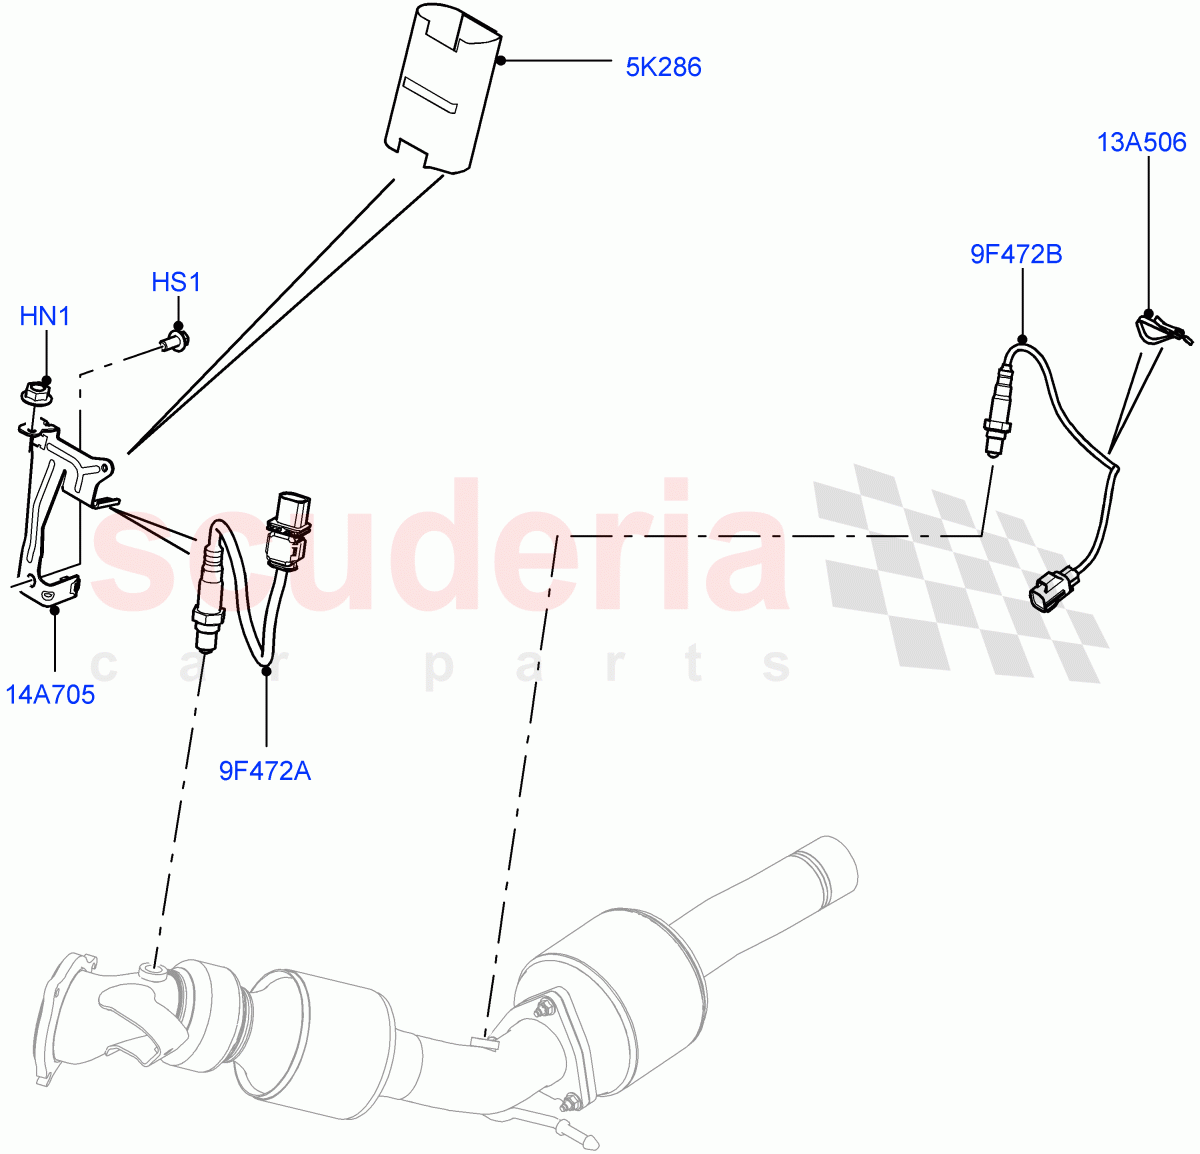 Exhaust System(Exhaust System Sensors)(2.0L 16V TIVCT T/C 240PS Petrol,Changsu (China))((V)FROMFG000001) of Land Rover Land Rover Discovery Sport (2015+) [2.0 Turbo Petrol GTDI]